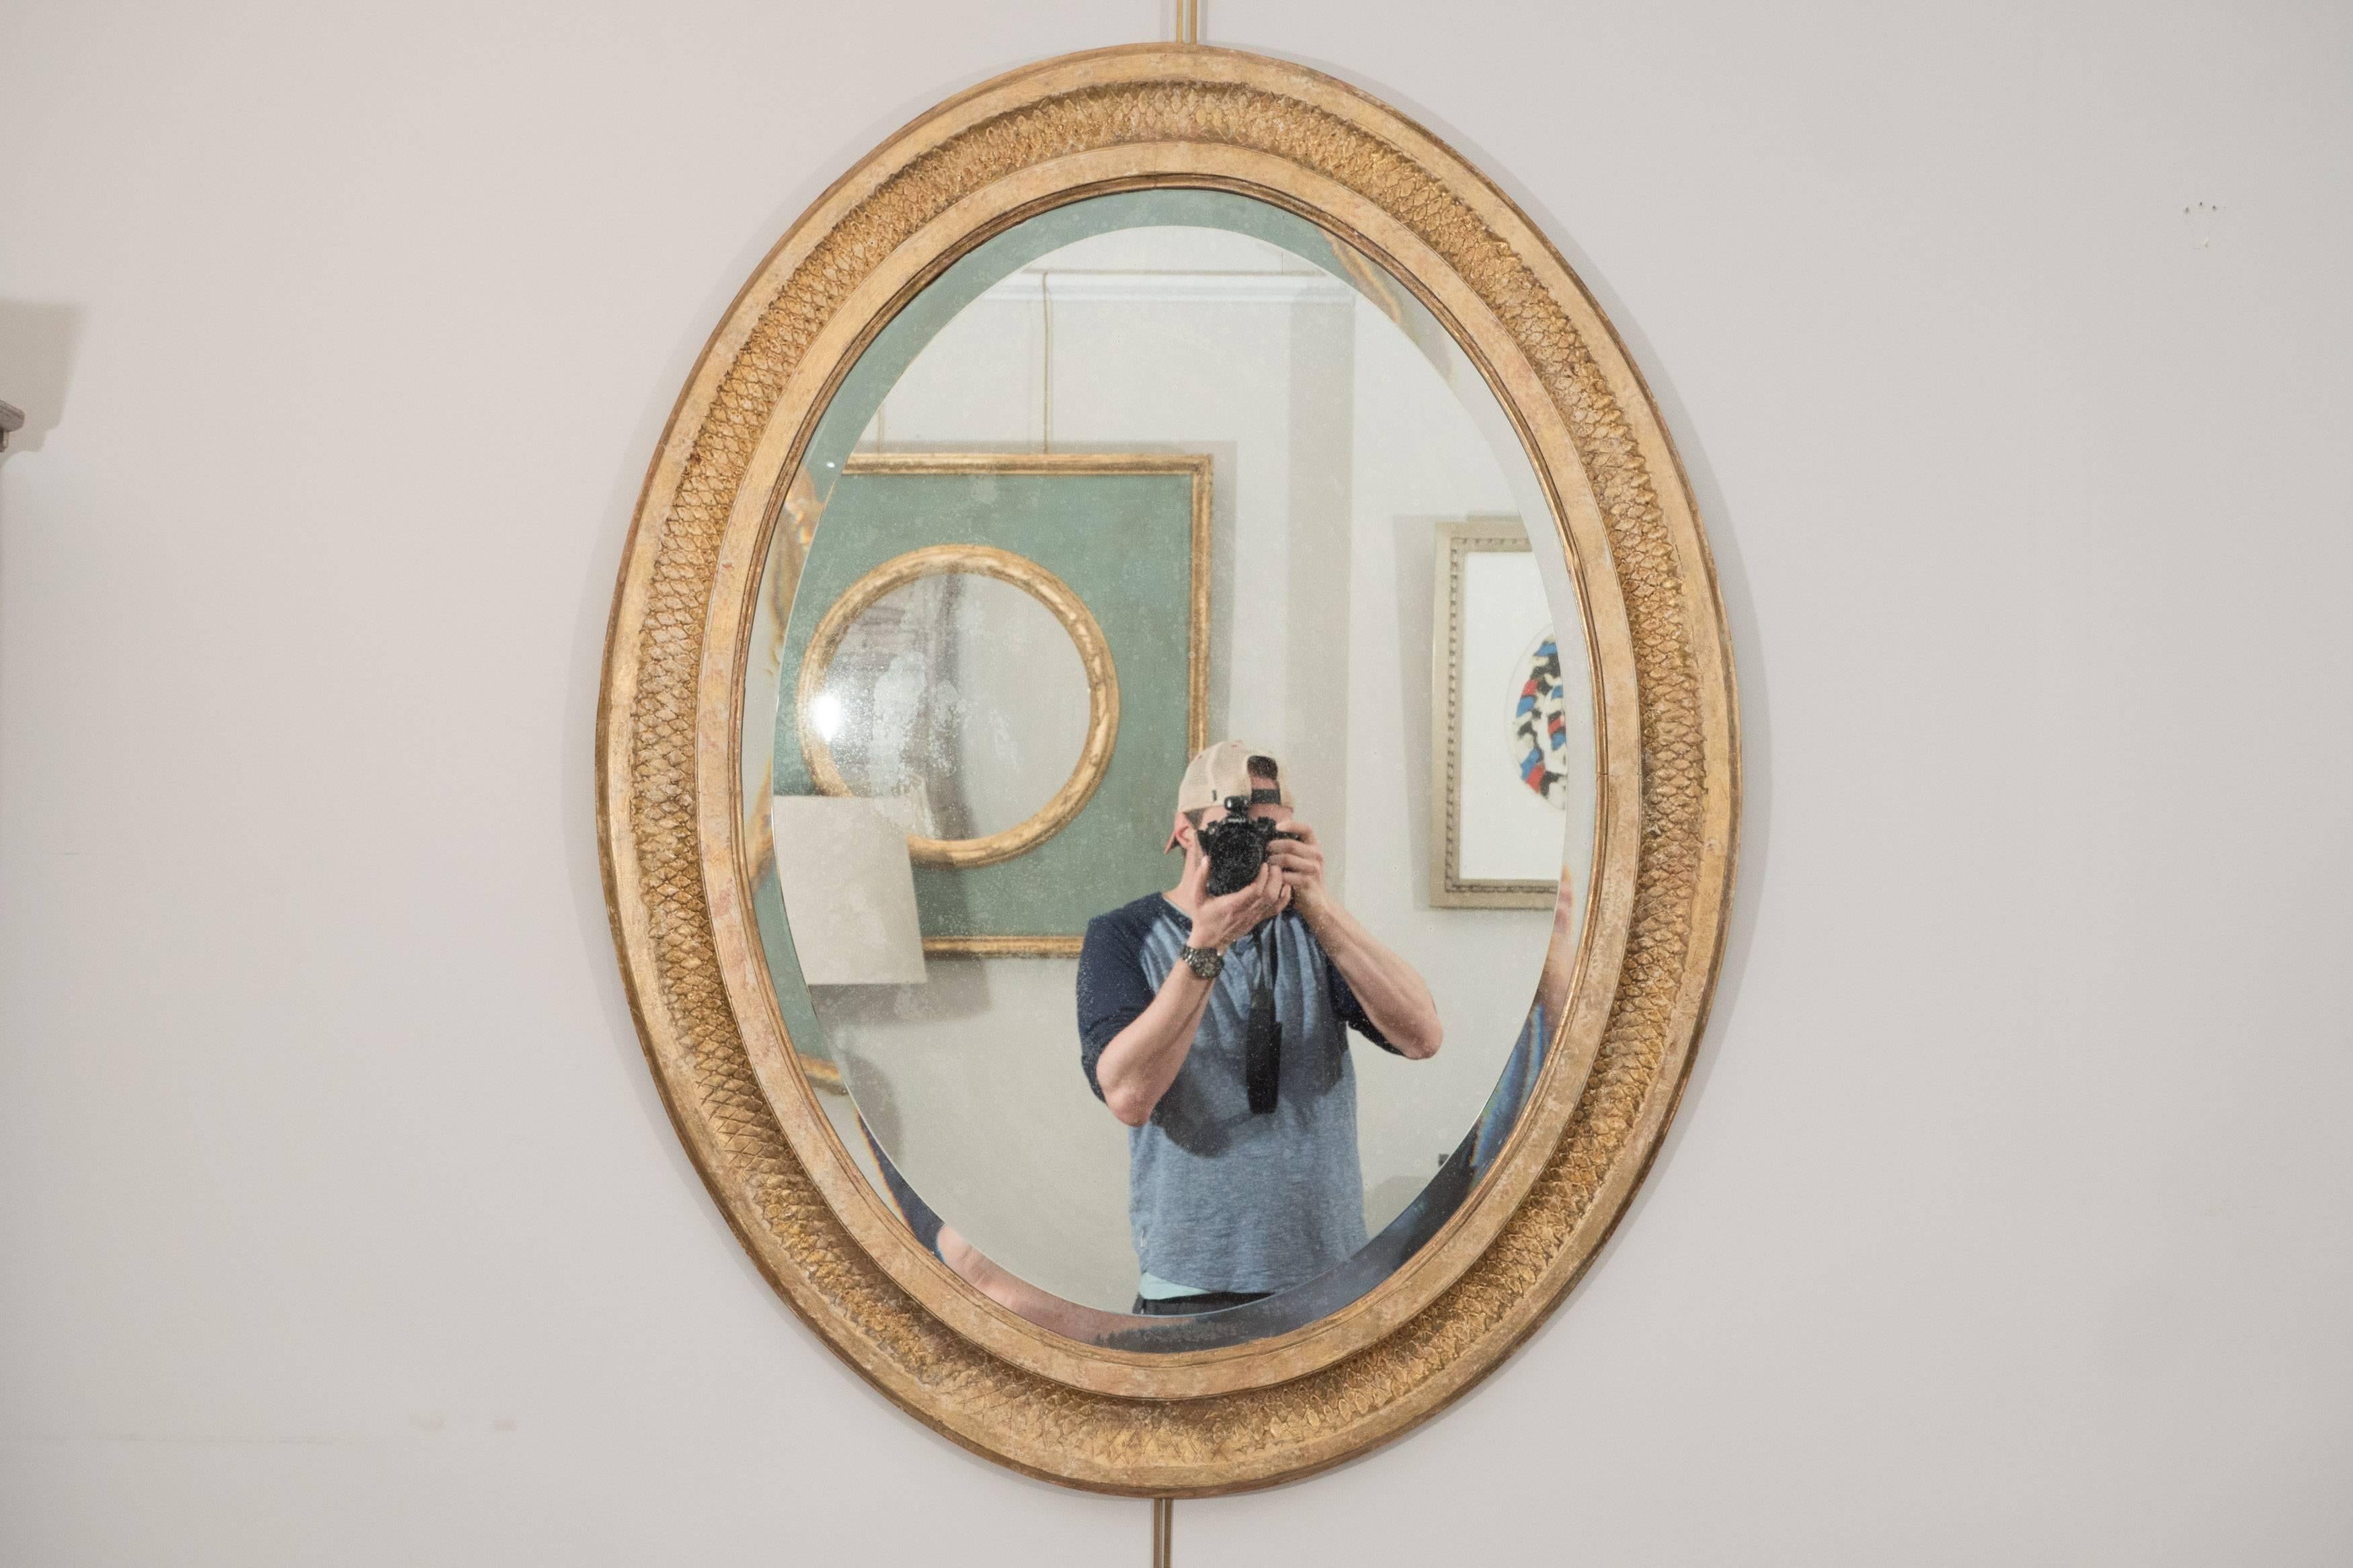 This mirror is a standout in terms of quality and workmanship. The oval beveled glass plate is set within a conforming giltwood frame featuring beautifully carved detail channeled between two molded edges. This gem is refined and elegant and would